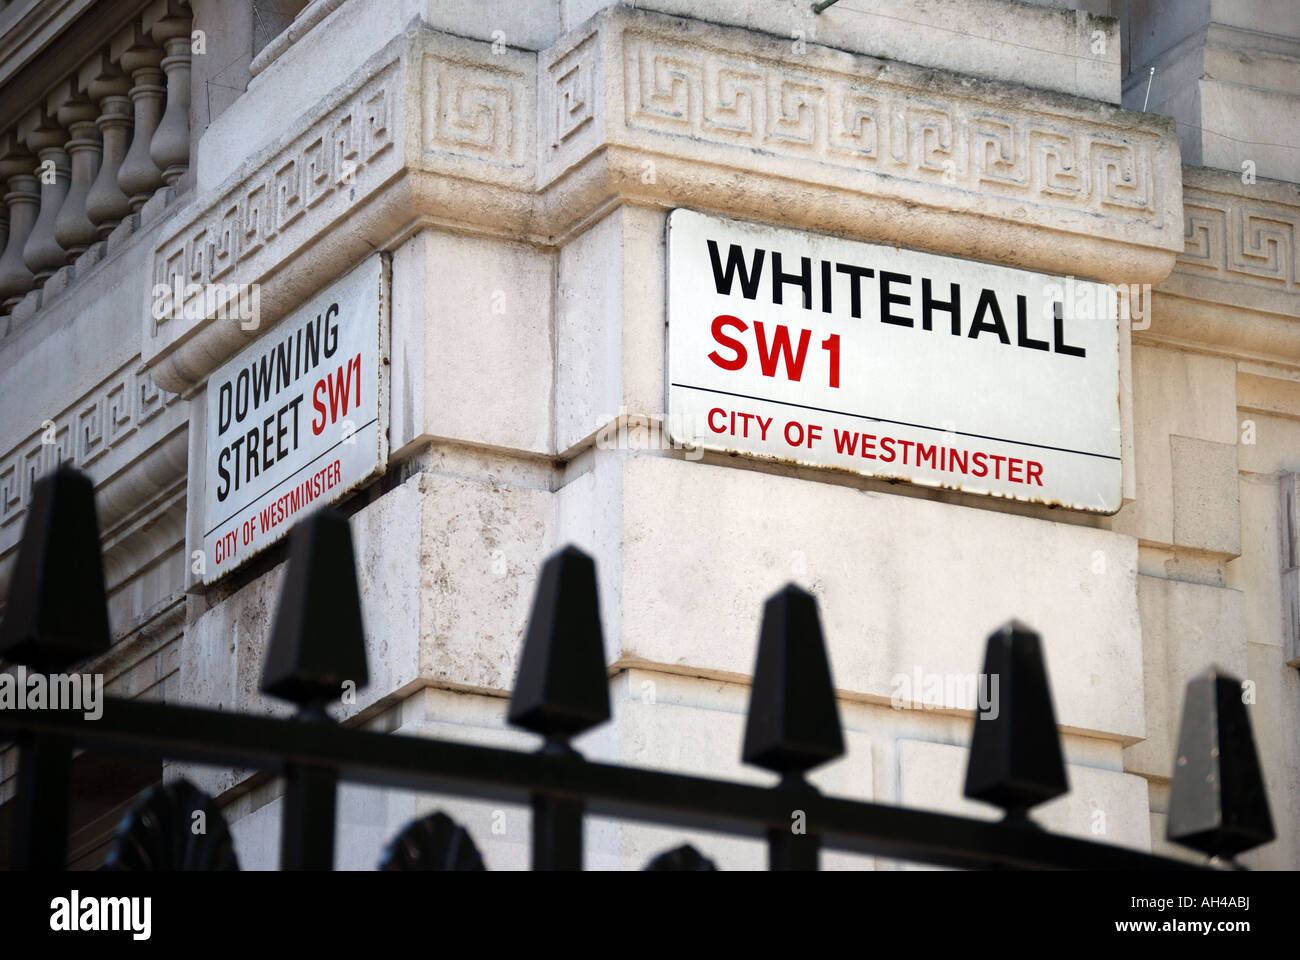 Segnali Stradali, Downing Street, Whitehall, City Of Westminster, Greater London, Inghilterra, Regno Unito Foto Stock